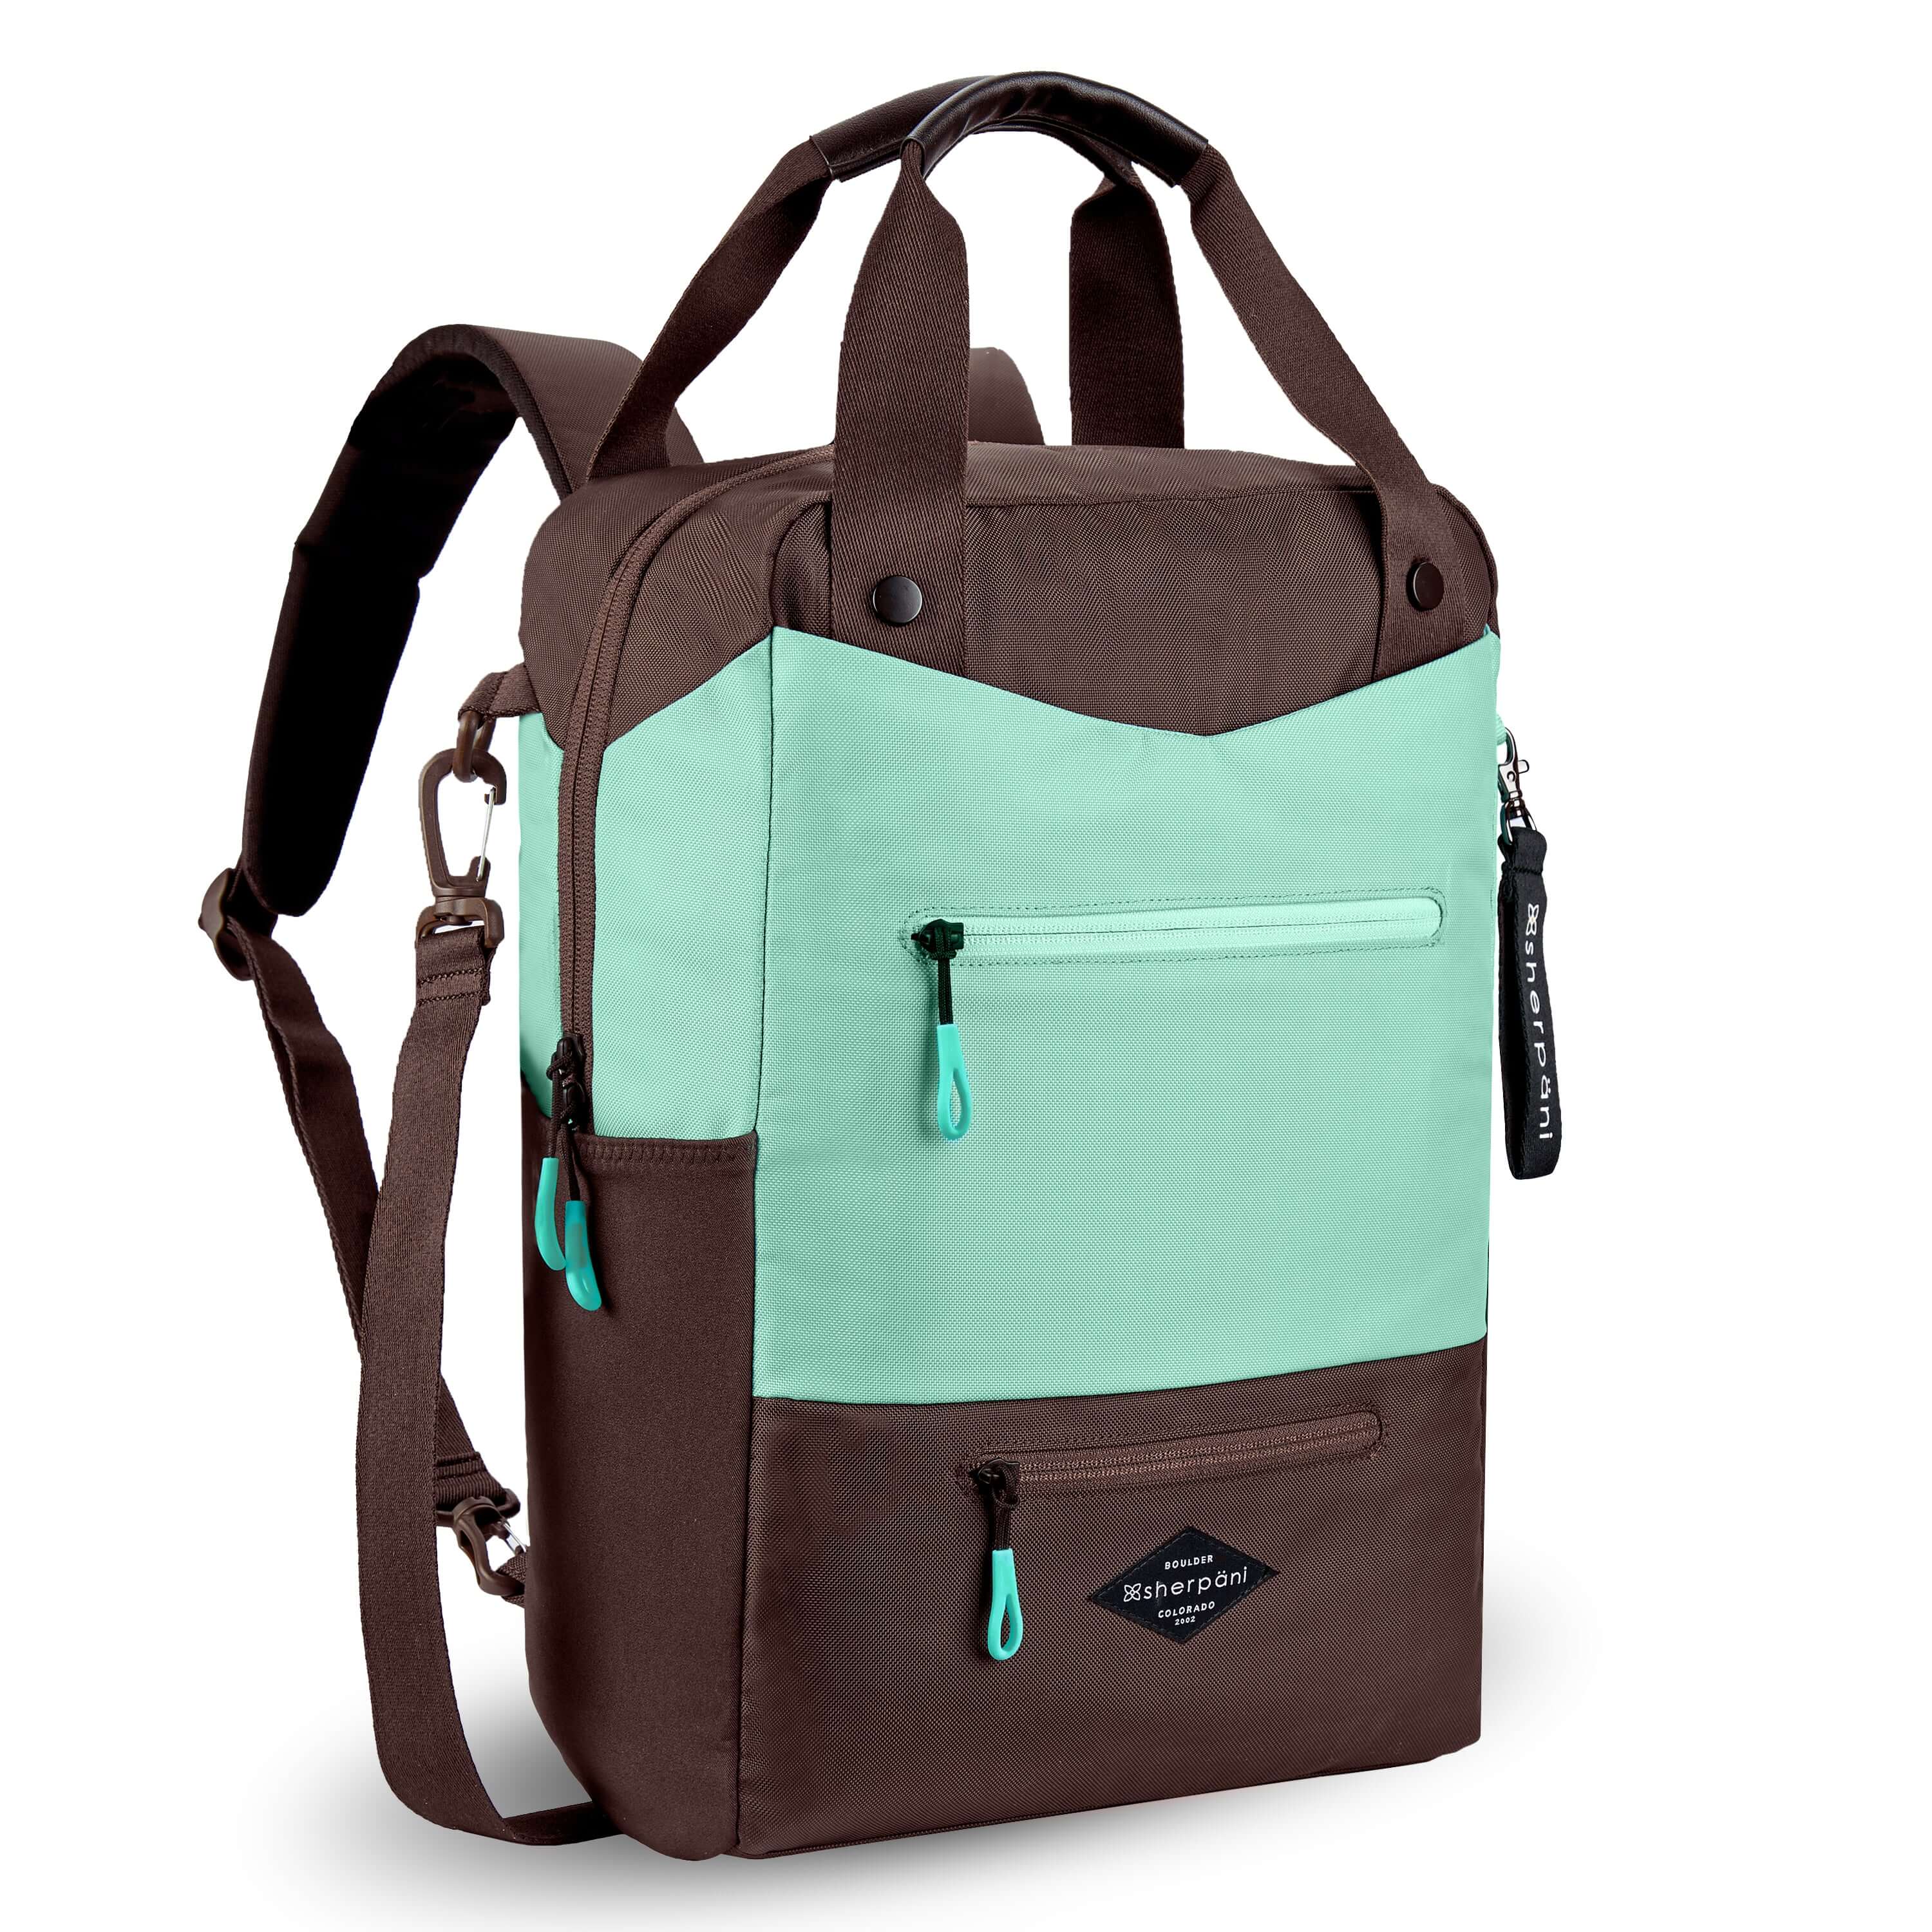 Angled front view of Sherpani's three-in-one bag, the Camden in Seagreen. The bag is two-toned in light green and brown. There are two external zipper pockets on the front panel with easy-pull zippers in light green. A branded Sherpani keychain is clipped to the upper right corner. An elastic water bottle holder sits on either side of the bag. The bag has an adjustable/detachable crossbody strap, padded/adjustable backpack straps and short tote handles fixed at the top. 